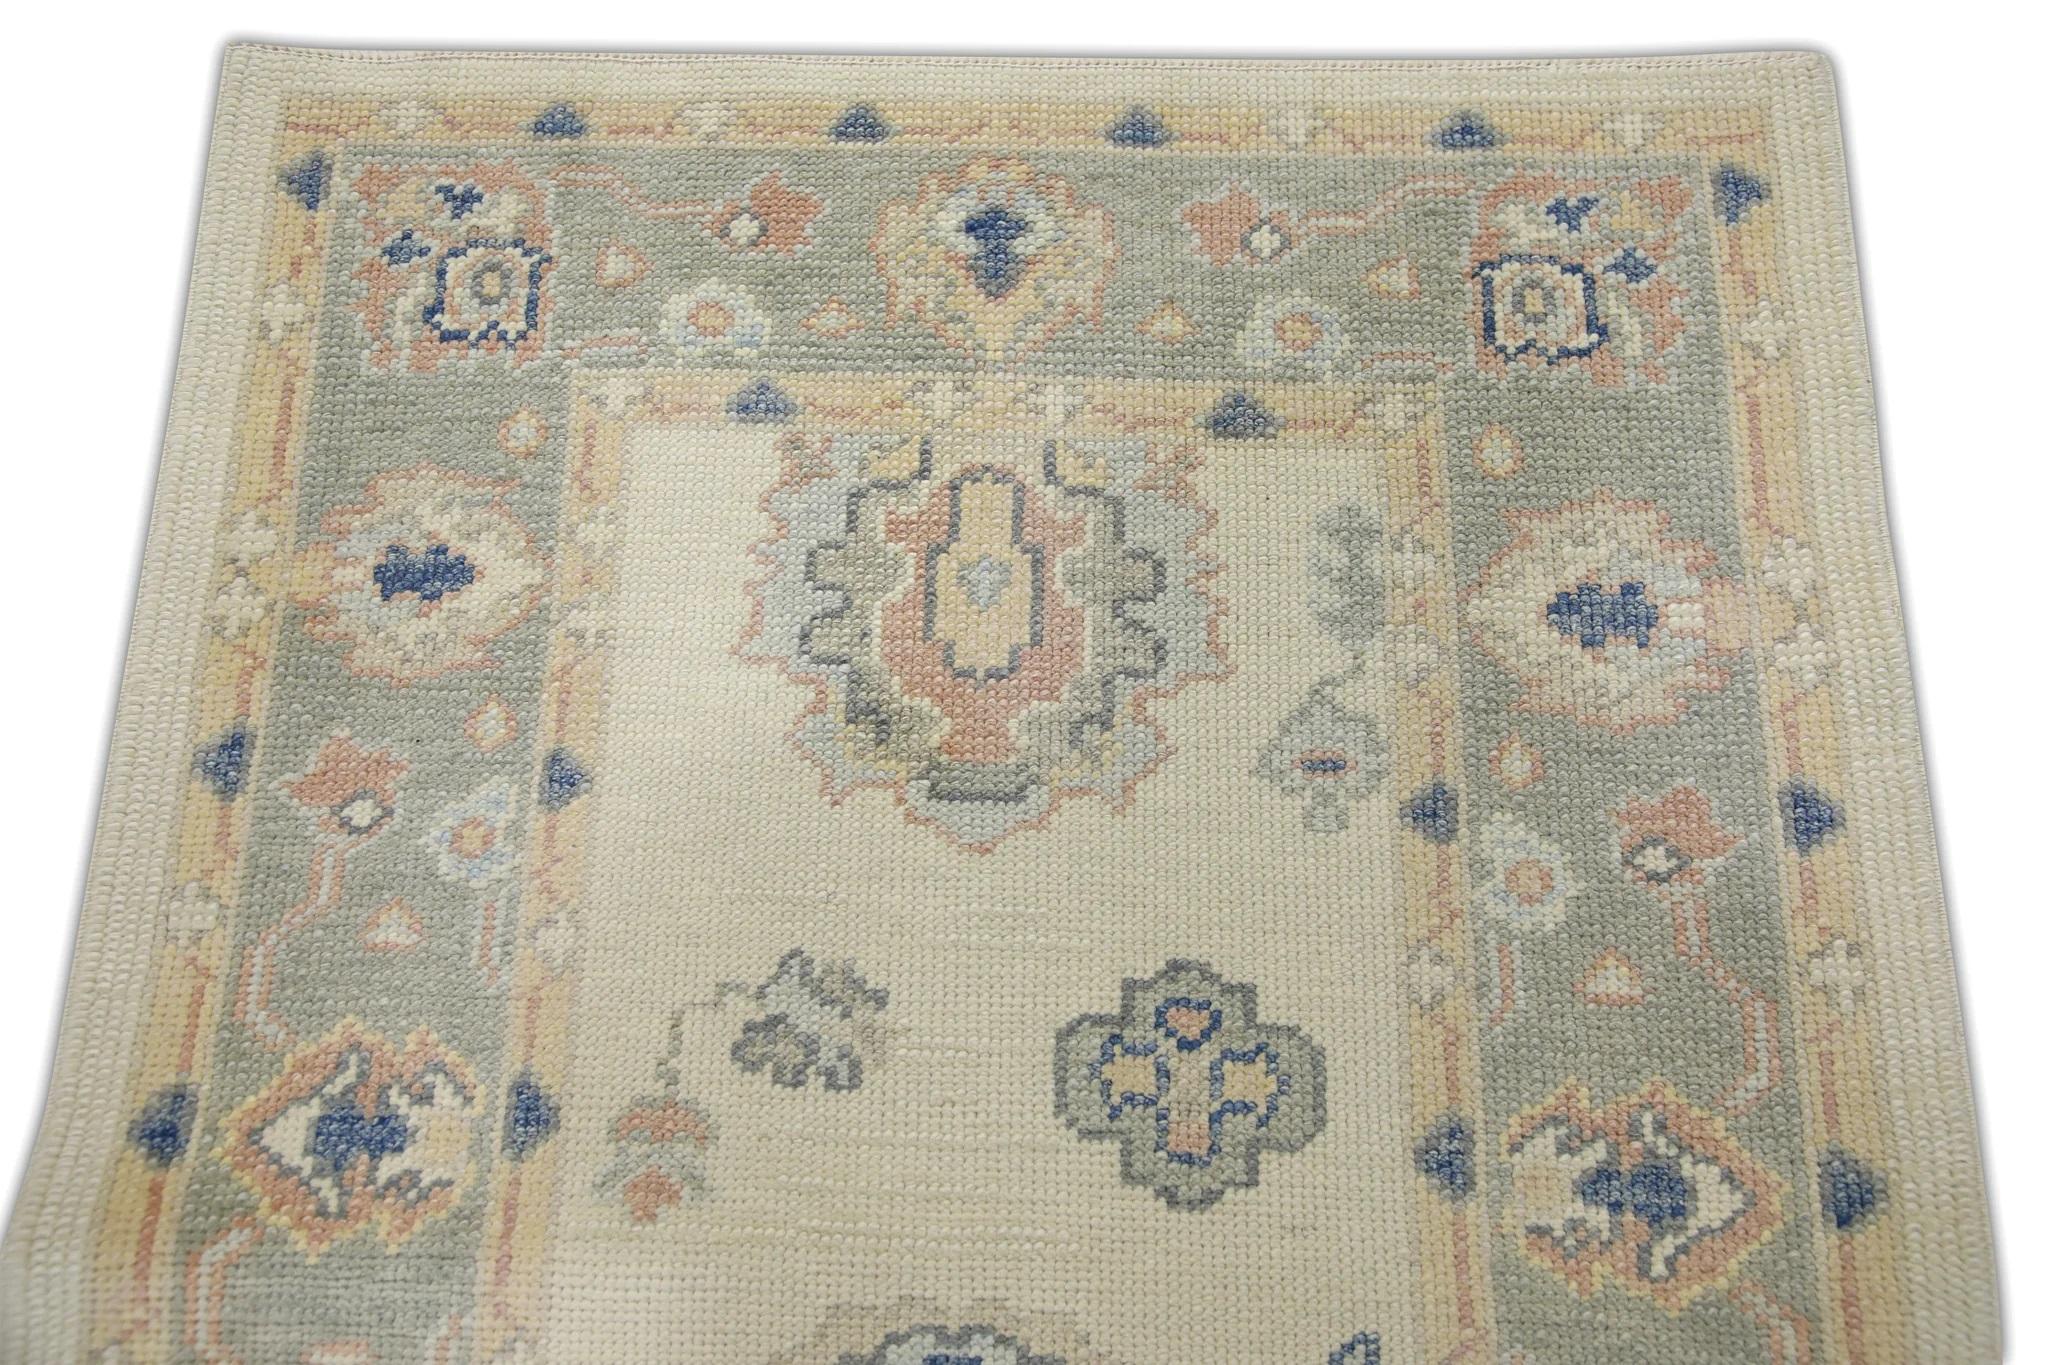 Vegetable Dyed Cream Handwoven Wool Turkish Oushak Rug in Pink & Blue Floral Design 3' x 8'11